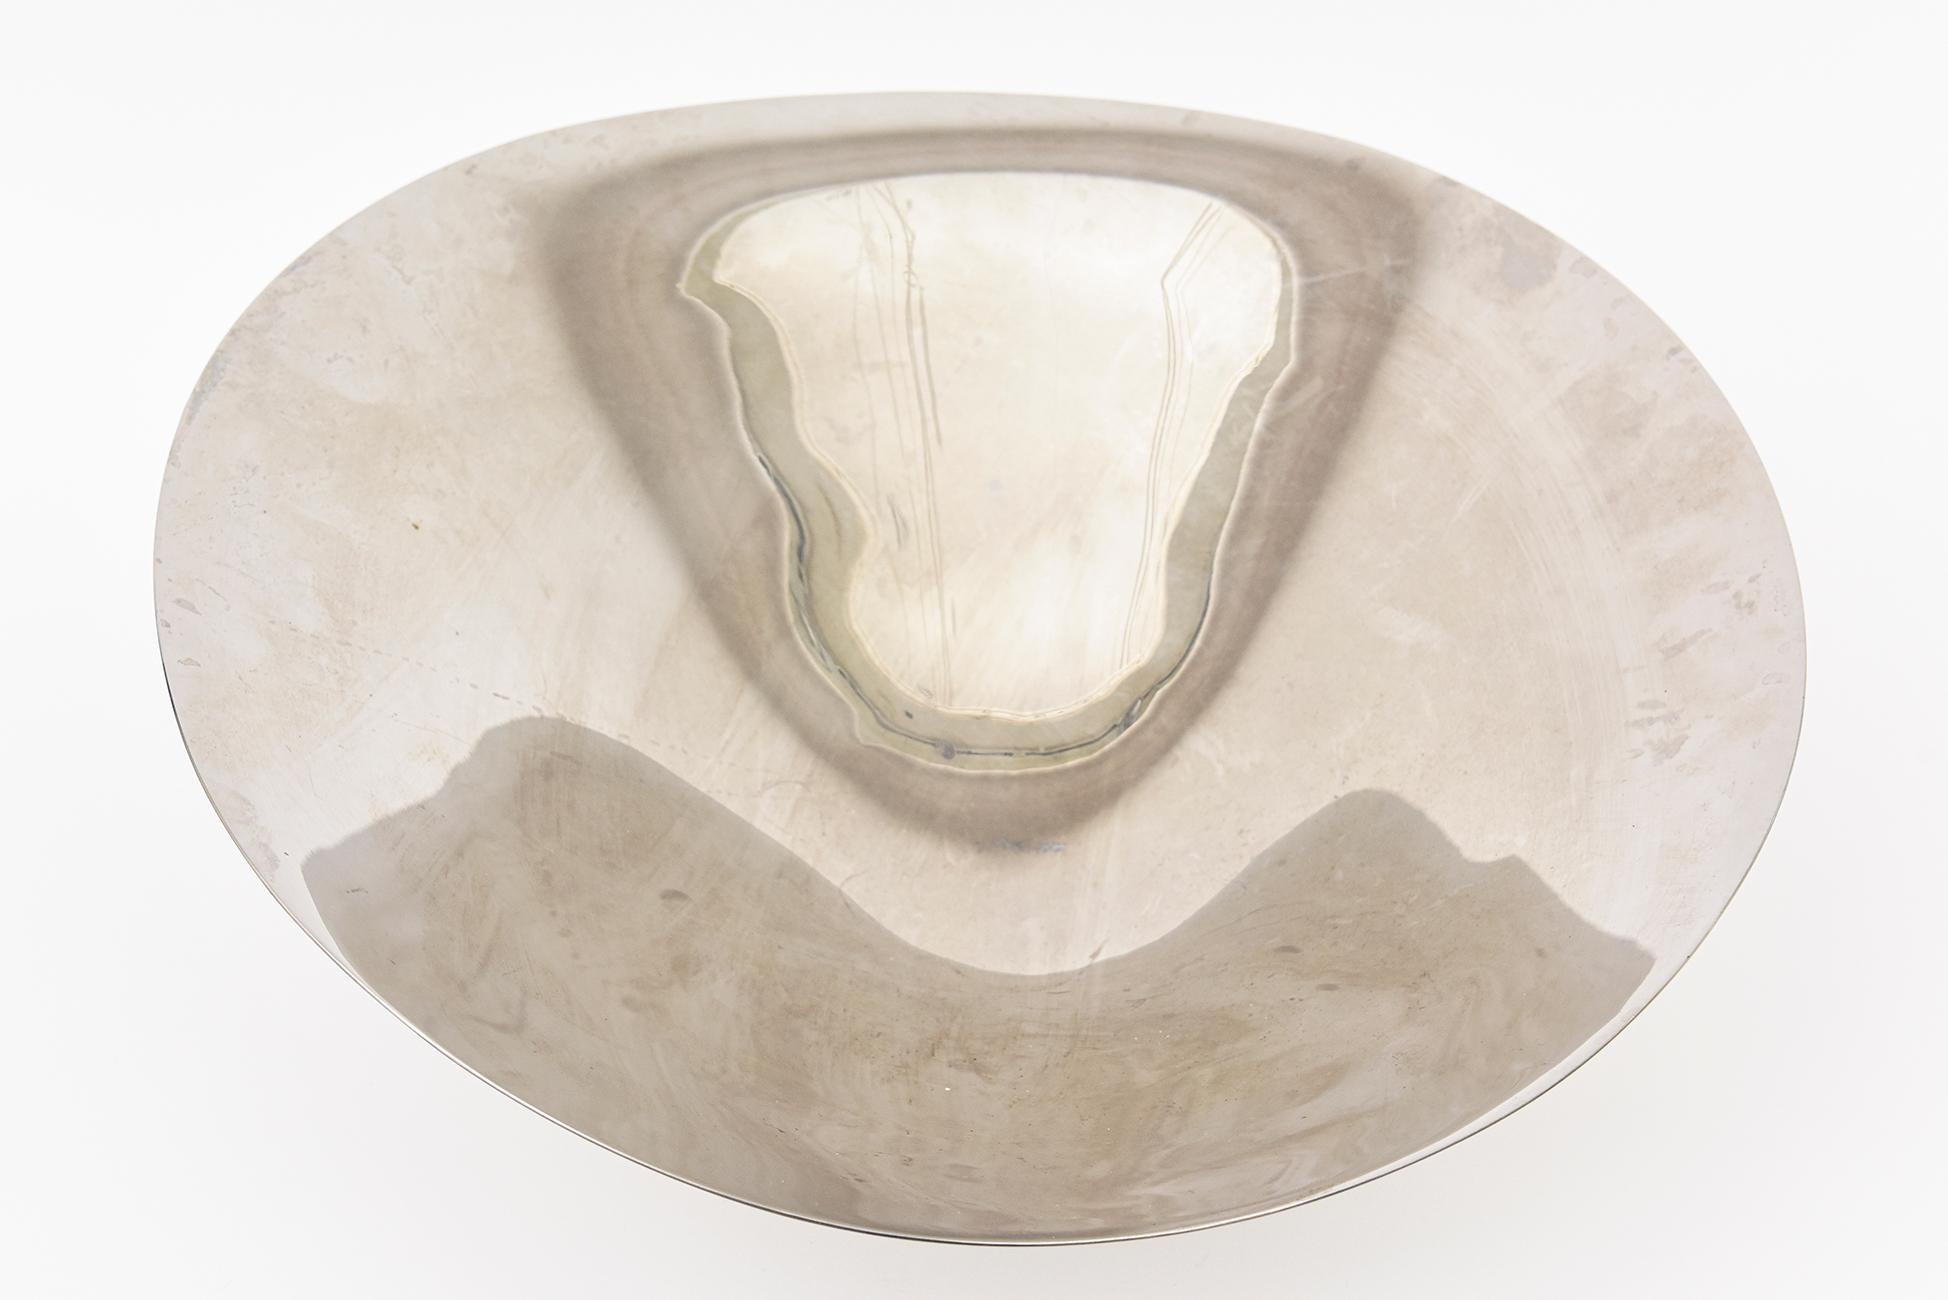 Henning Koppel for Georg Jensen Stainless Steel Biomorphic Bowl Or Serving Bowl In Good Condition For Sale In North Miami, FL